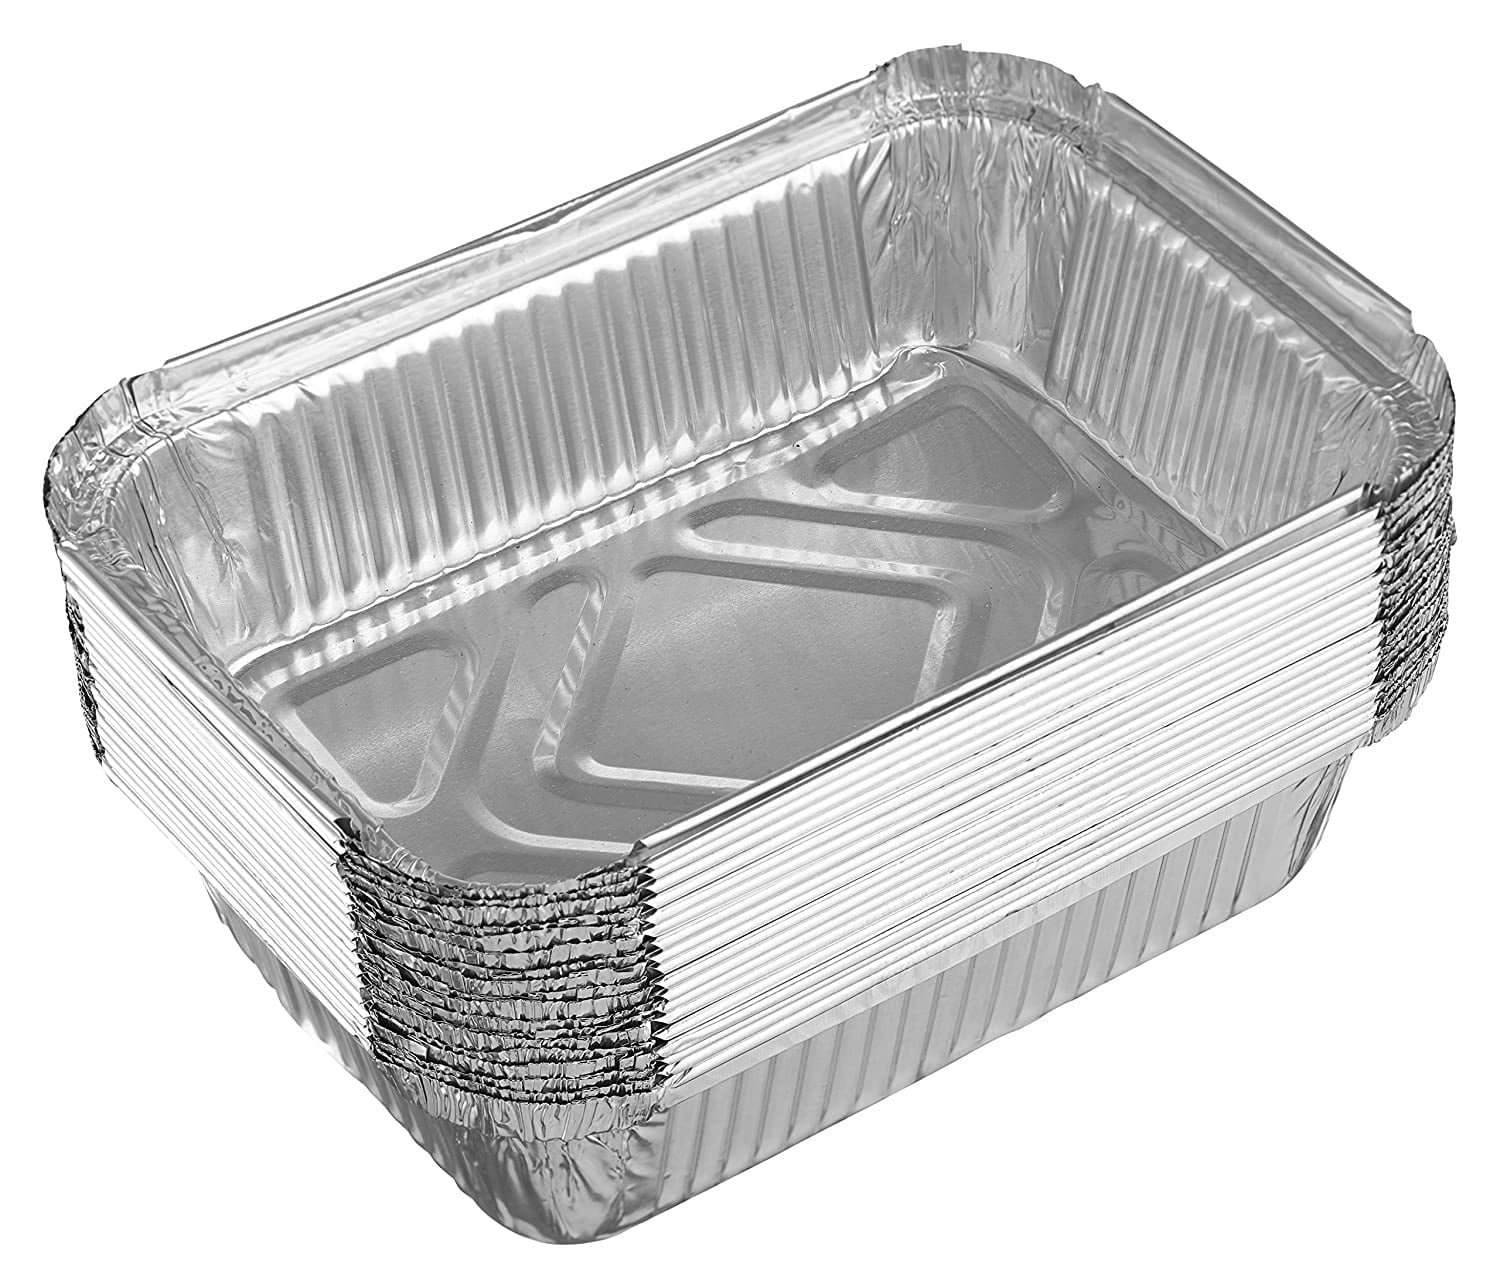 Foil Lux 12 x 8.75 x 1.75 inch to Go Containers, 100 Oblong Take Out Containers - 4 lb, Oven-Ready, Silver Aluminum Carry Out Containers, Freezable, D